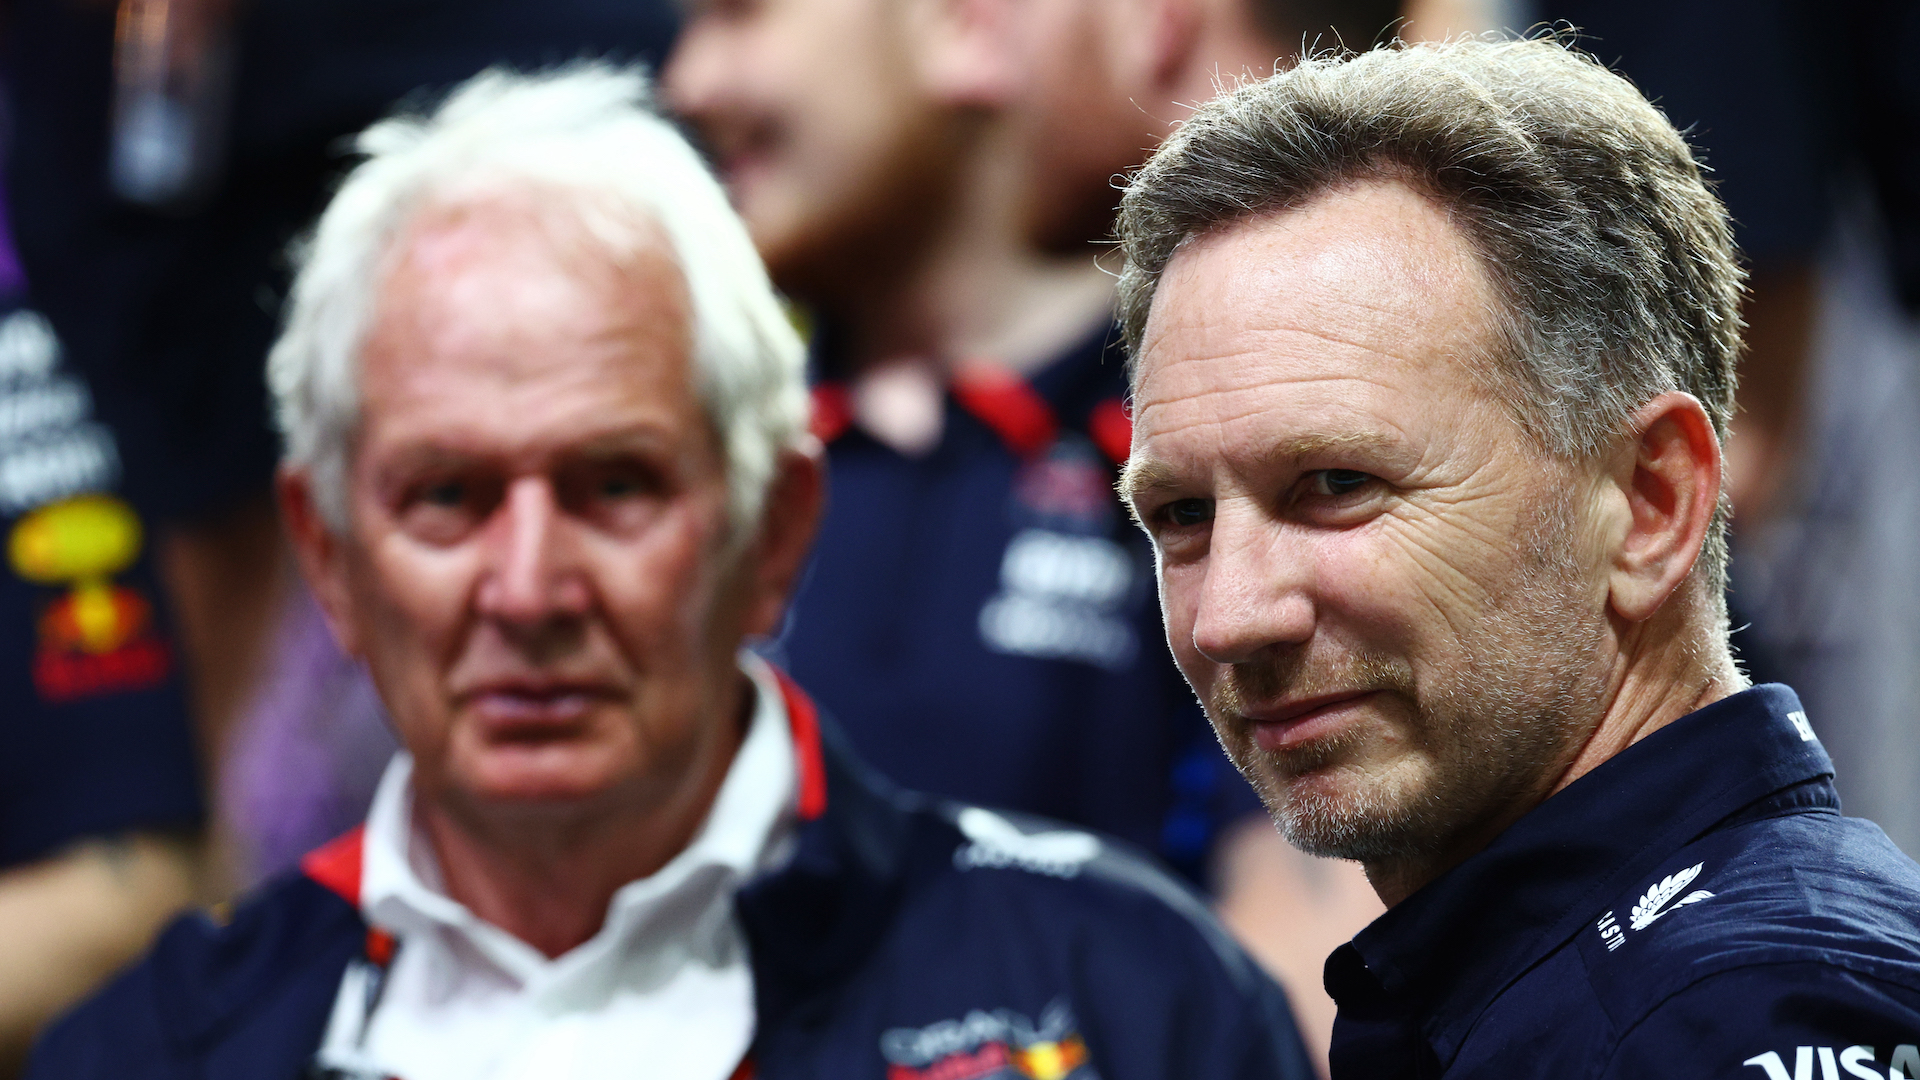 Oracle Red Bull Racing Team Principal Christian Horner looks on in parc ferme during the F1 Grand Prix of Saudi Arabia at Jeddah Corniche Circuit.